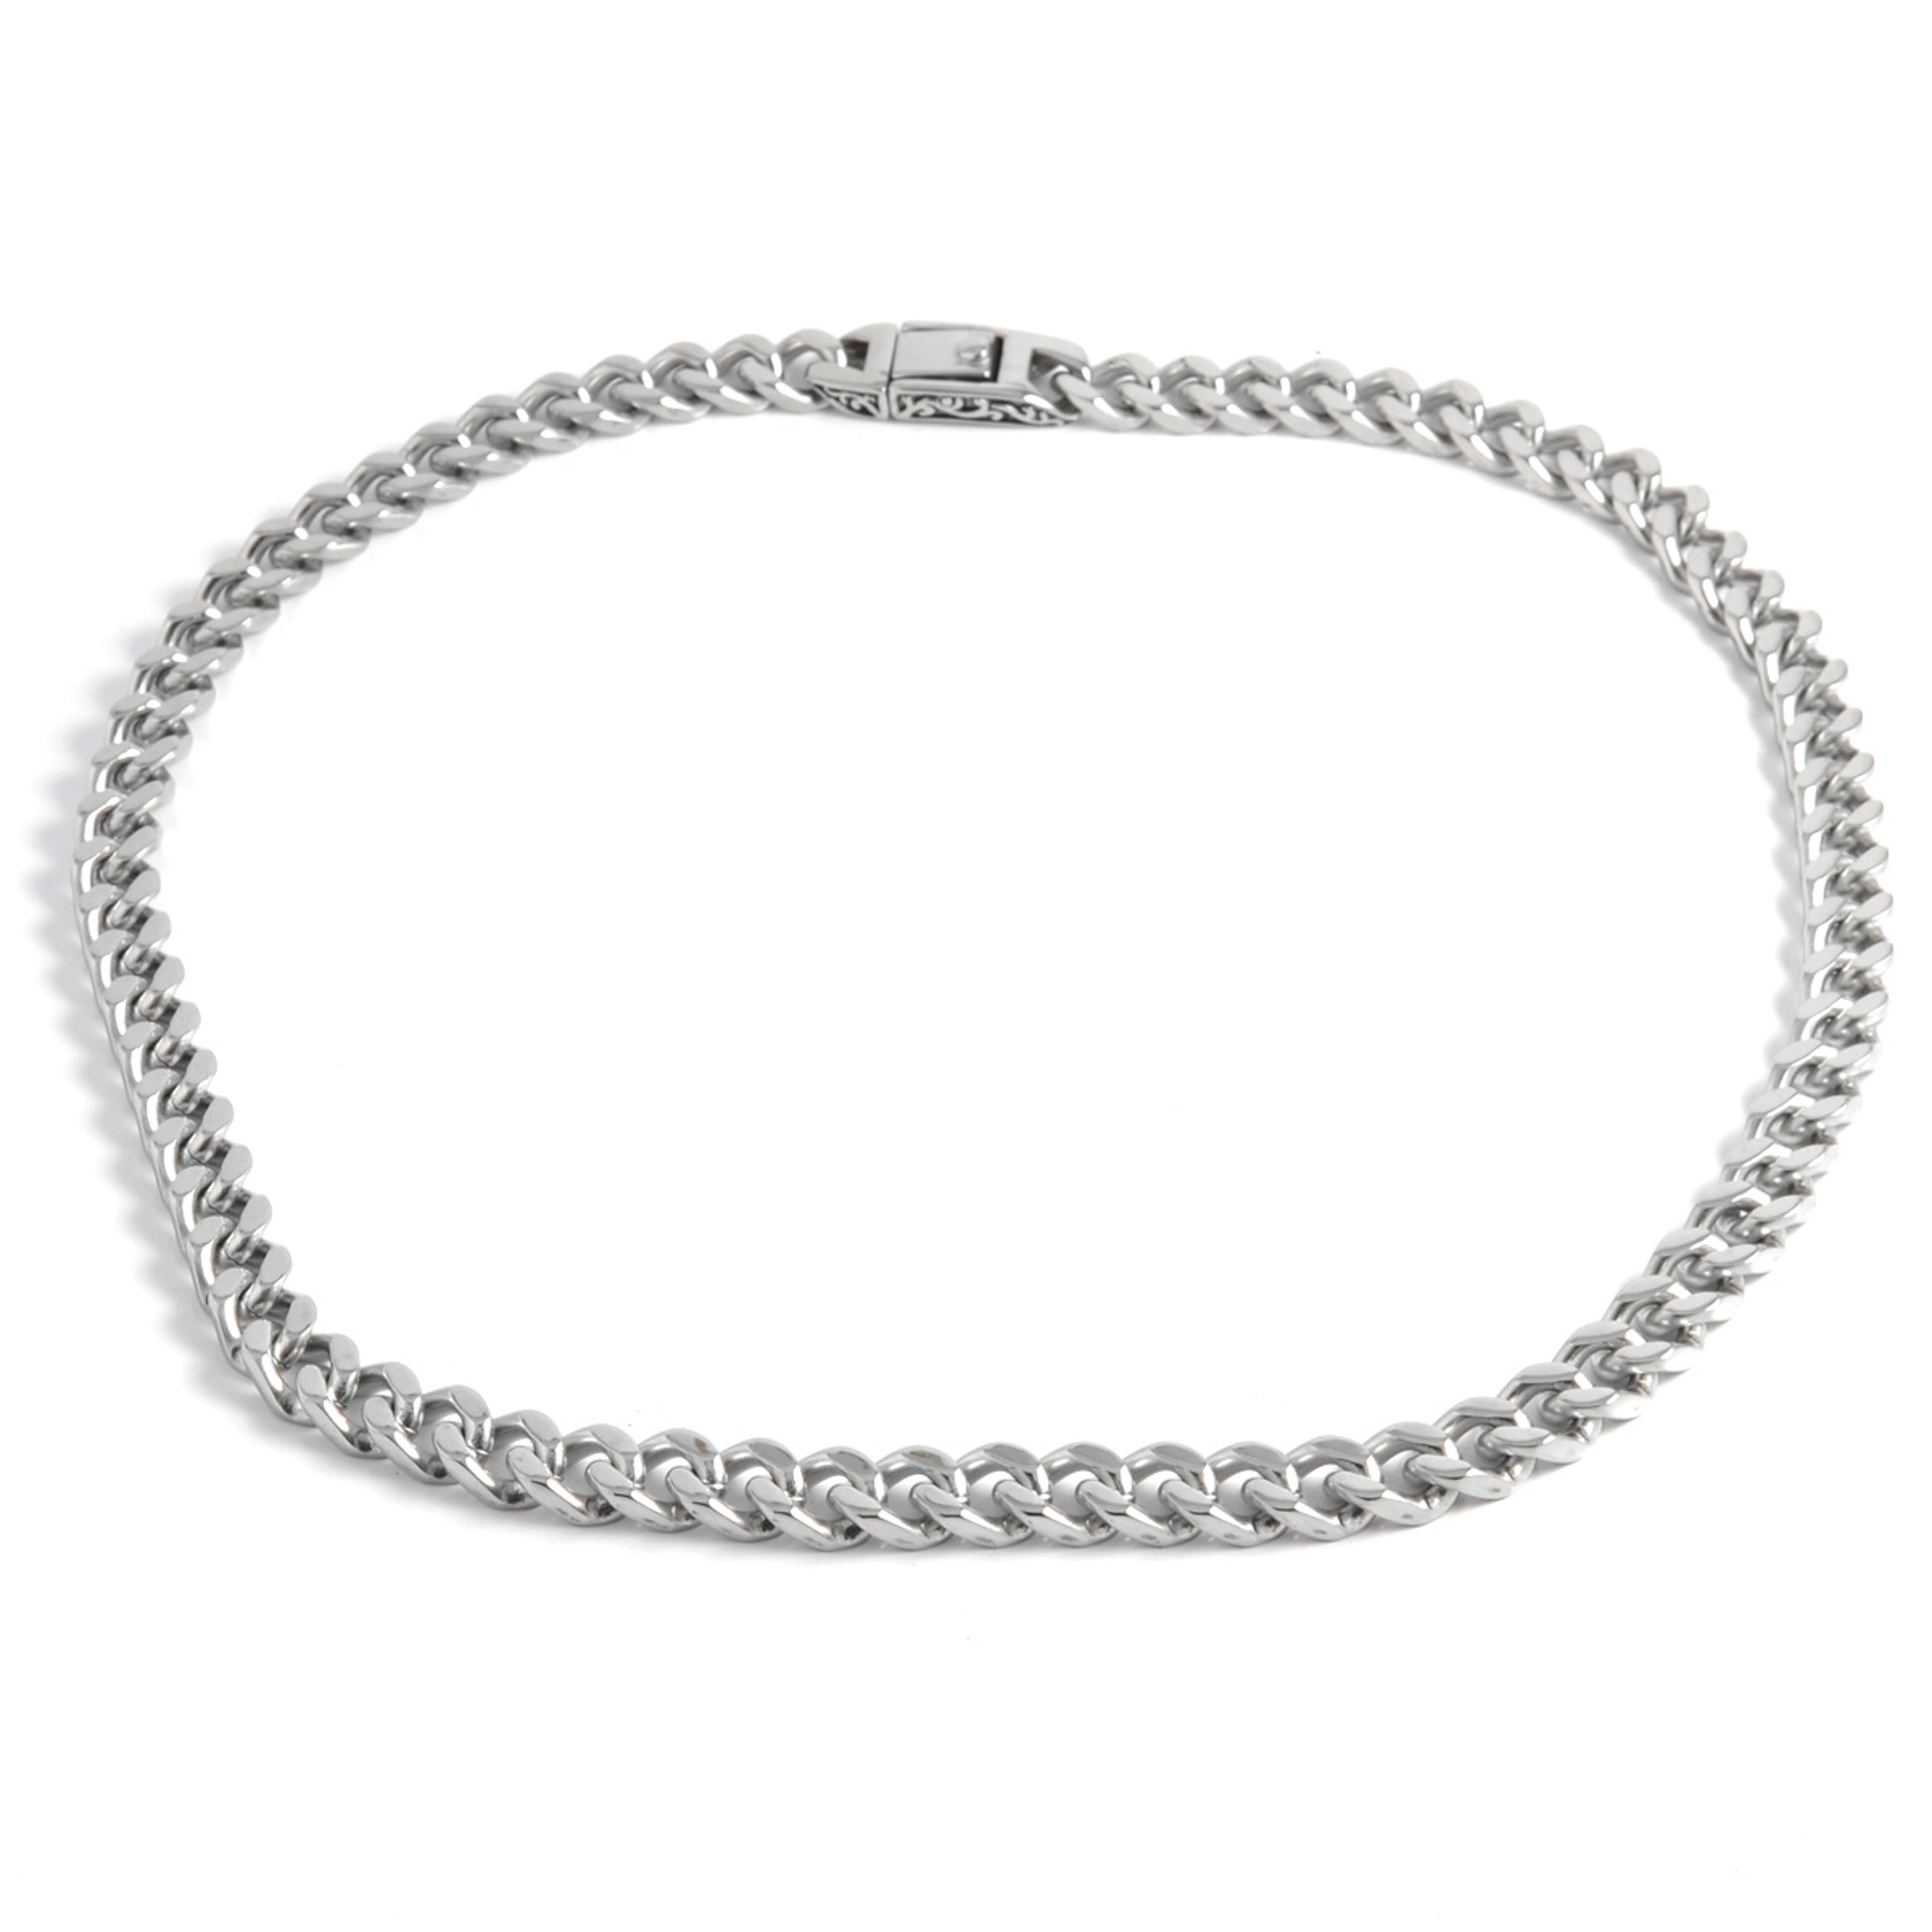 10 mm Silver-Tone Stainless Steel With Unique Lock Cuban Chain Necklace